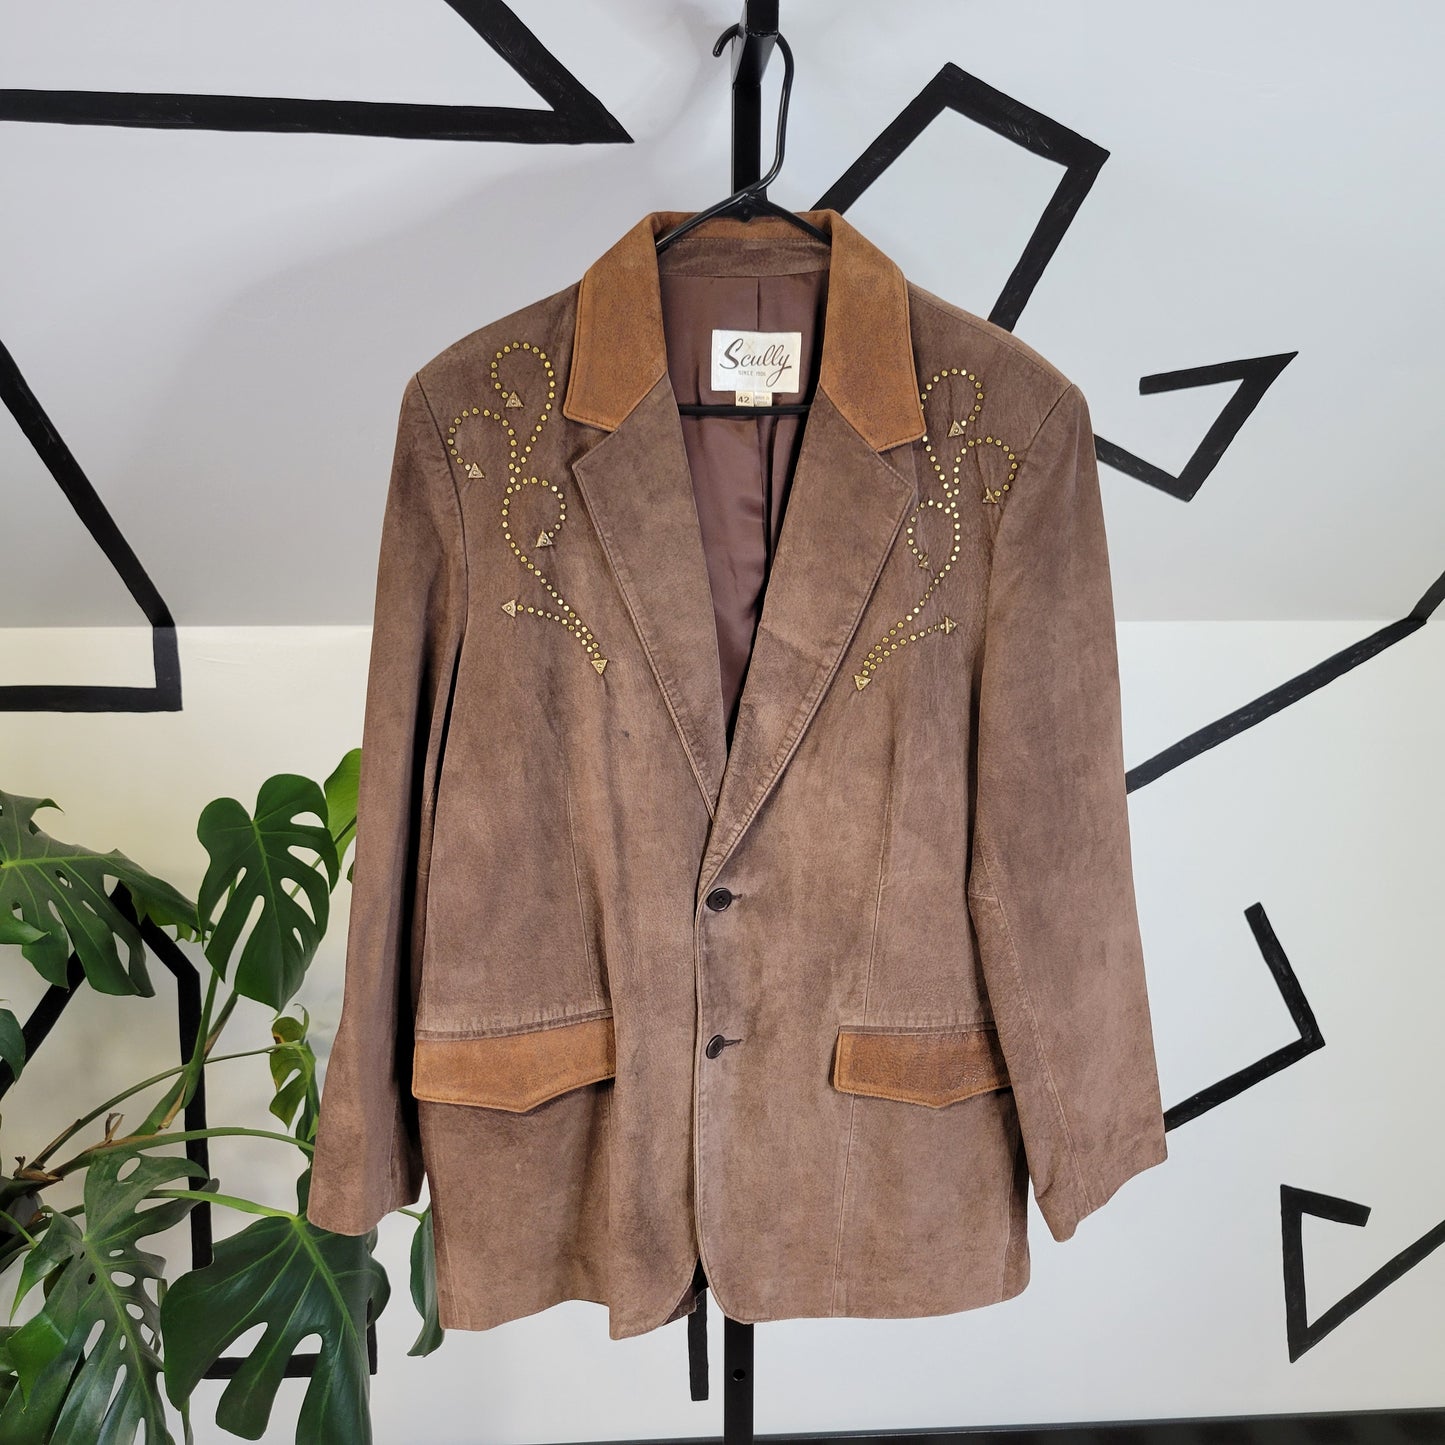 Scully Vintage Suede Leather Blazer with Stud Details - Size 42